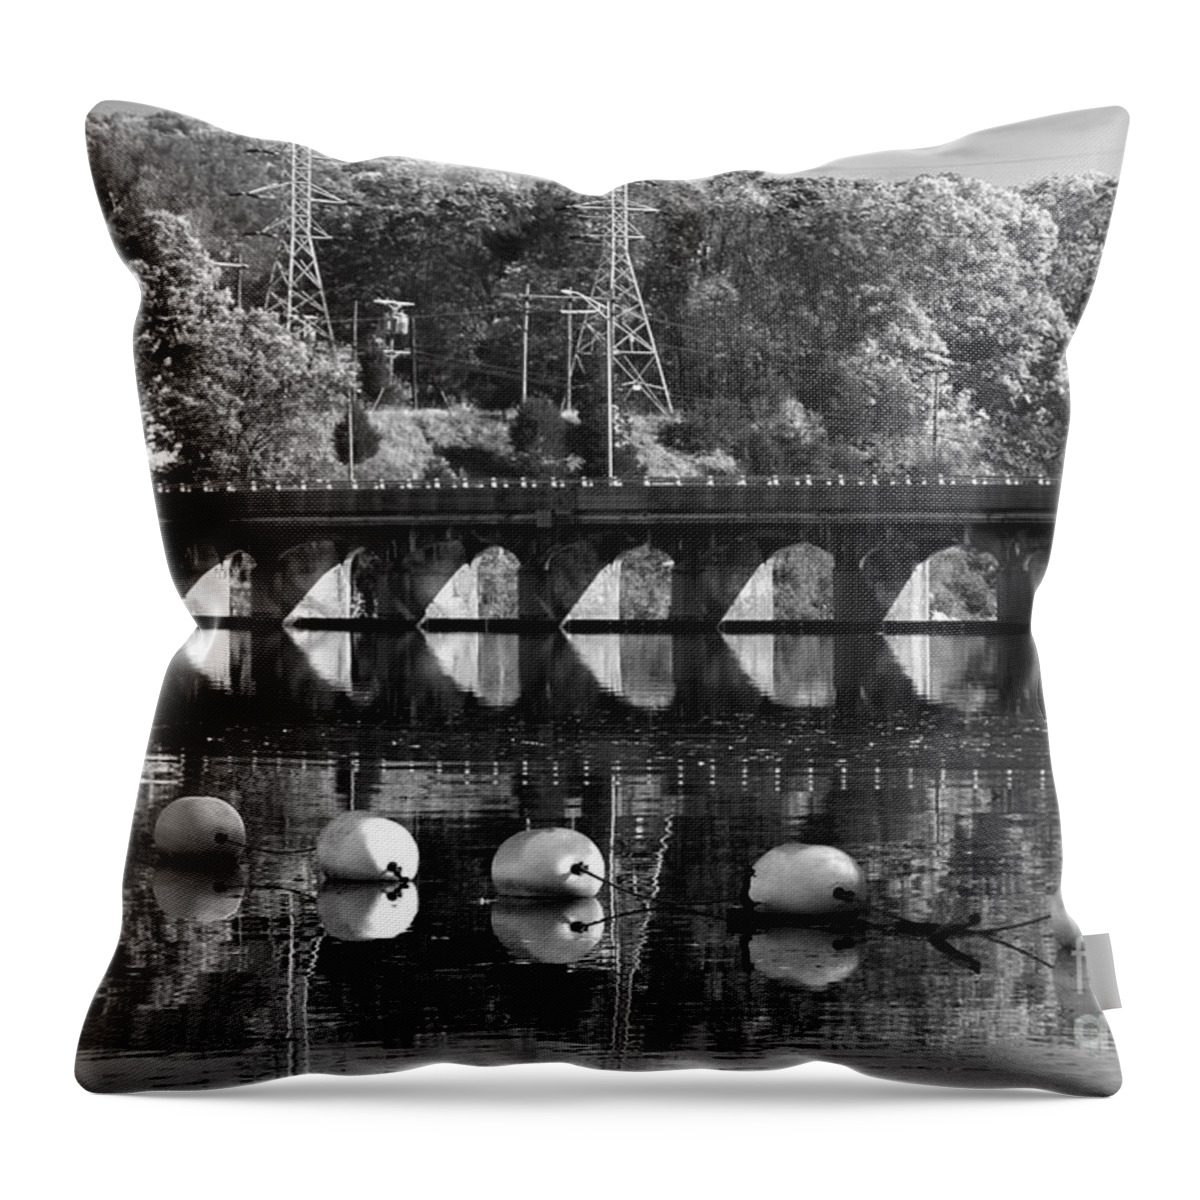 Landscape Throw Pillow featuring the photograph Bridge Reflection by Karol Livote